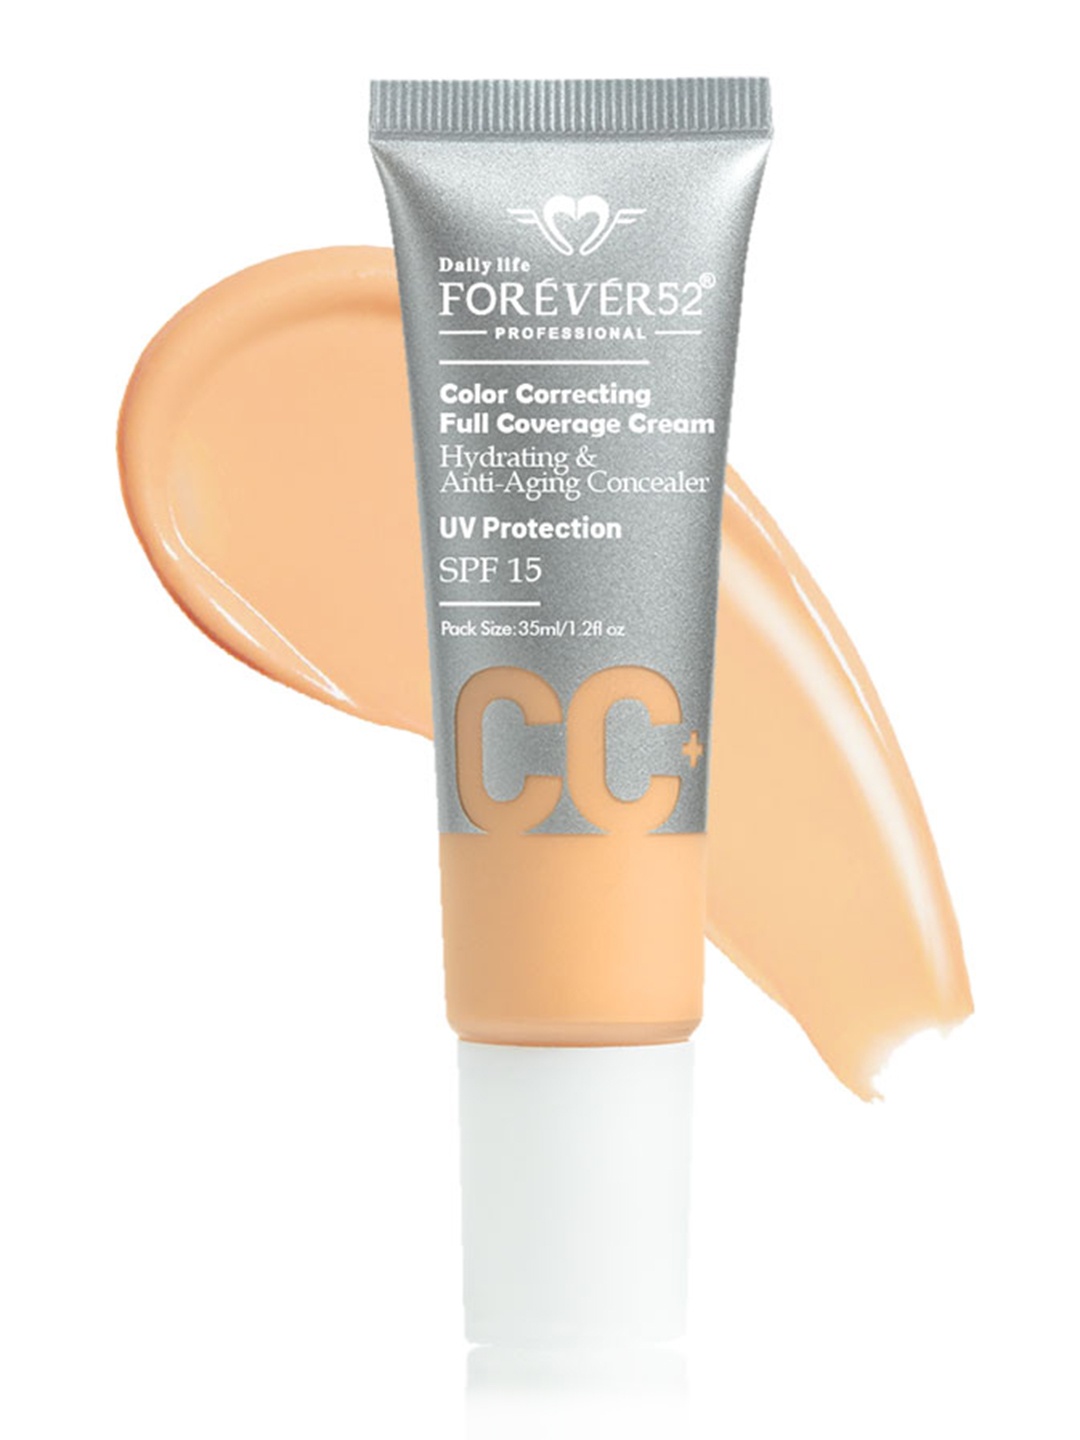 

Daily Life Forever52 Color Correcting Full Coverage CC Cream - 35ml - Greige 004, Beige